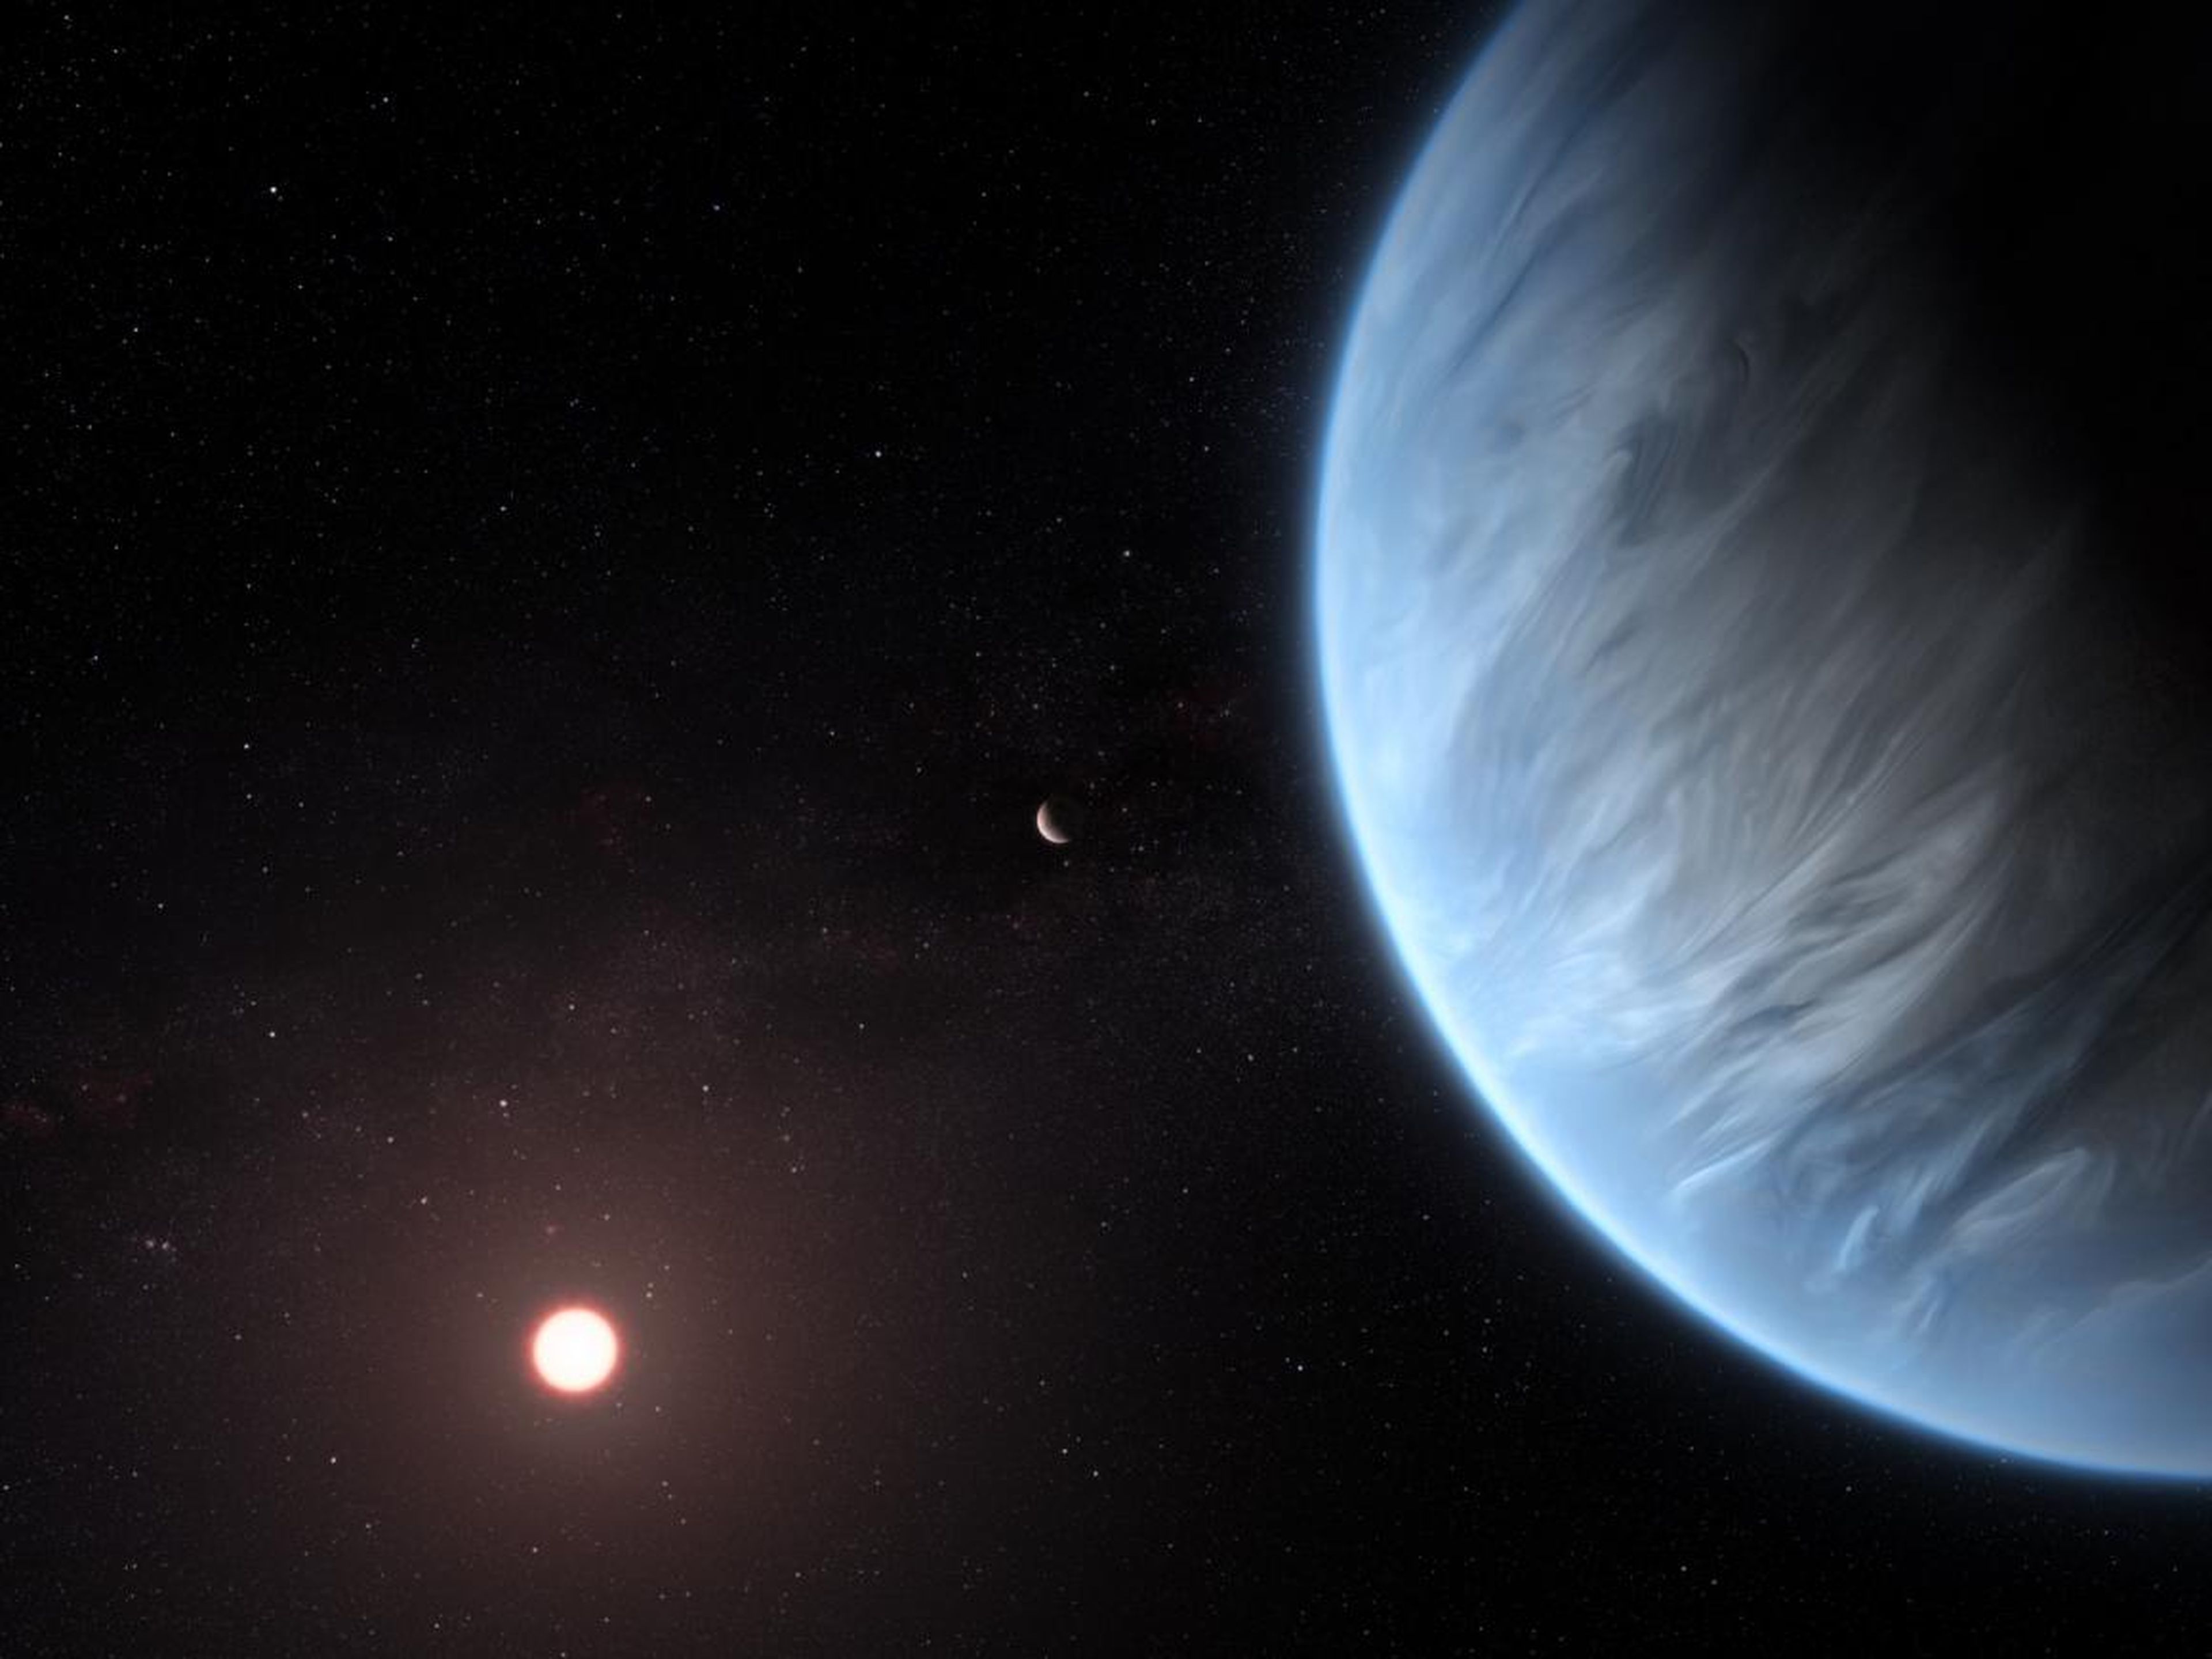 An artist's impression shows the planet K2-18b, the only exoplanet known to host both water and temperatures that could support life. Its host star and an accompanying planet in the system are also shown.